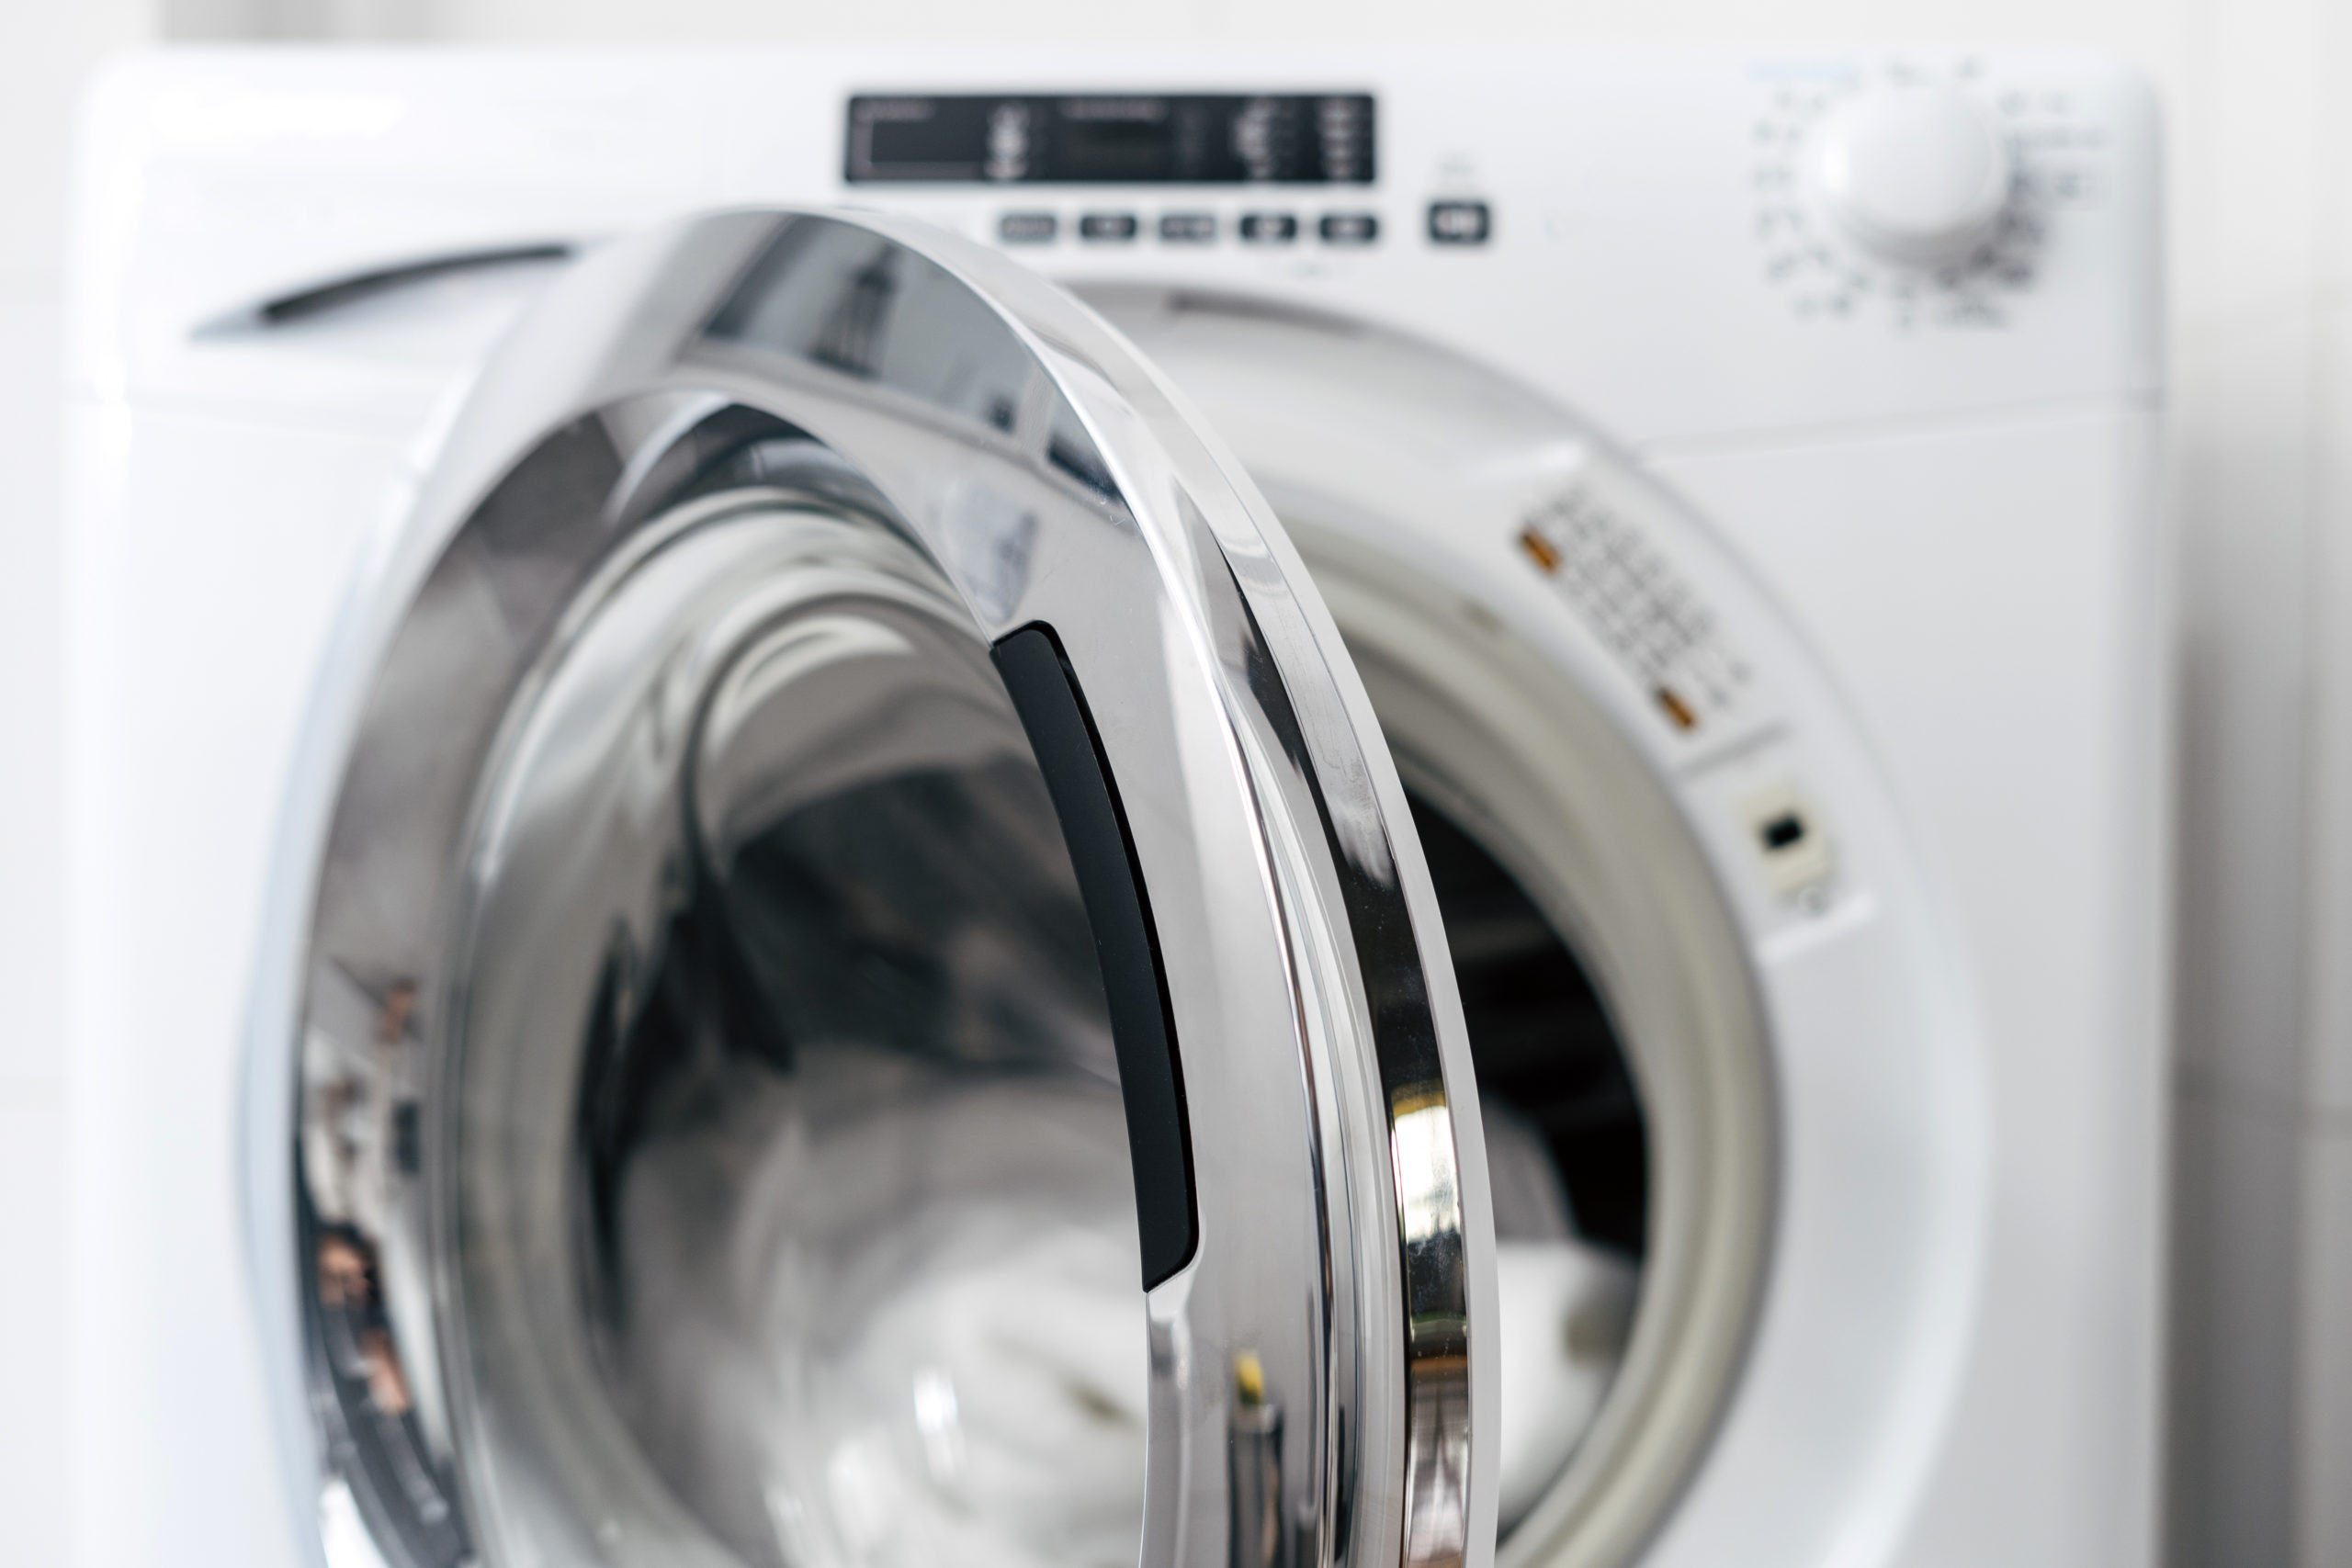 What Are Some Common Problems That Cause A Dryer Not To Heat Up?